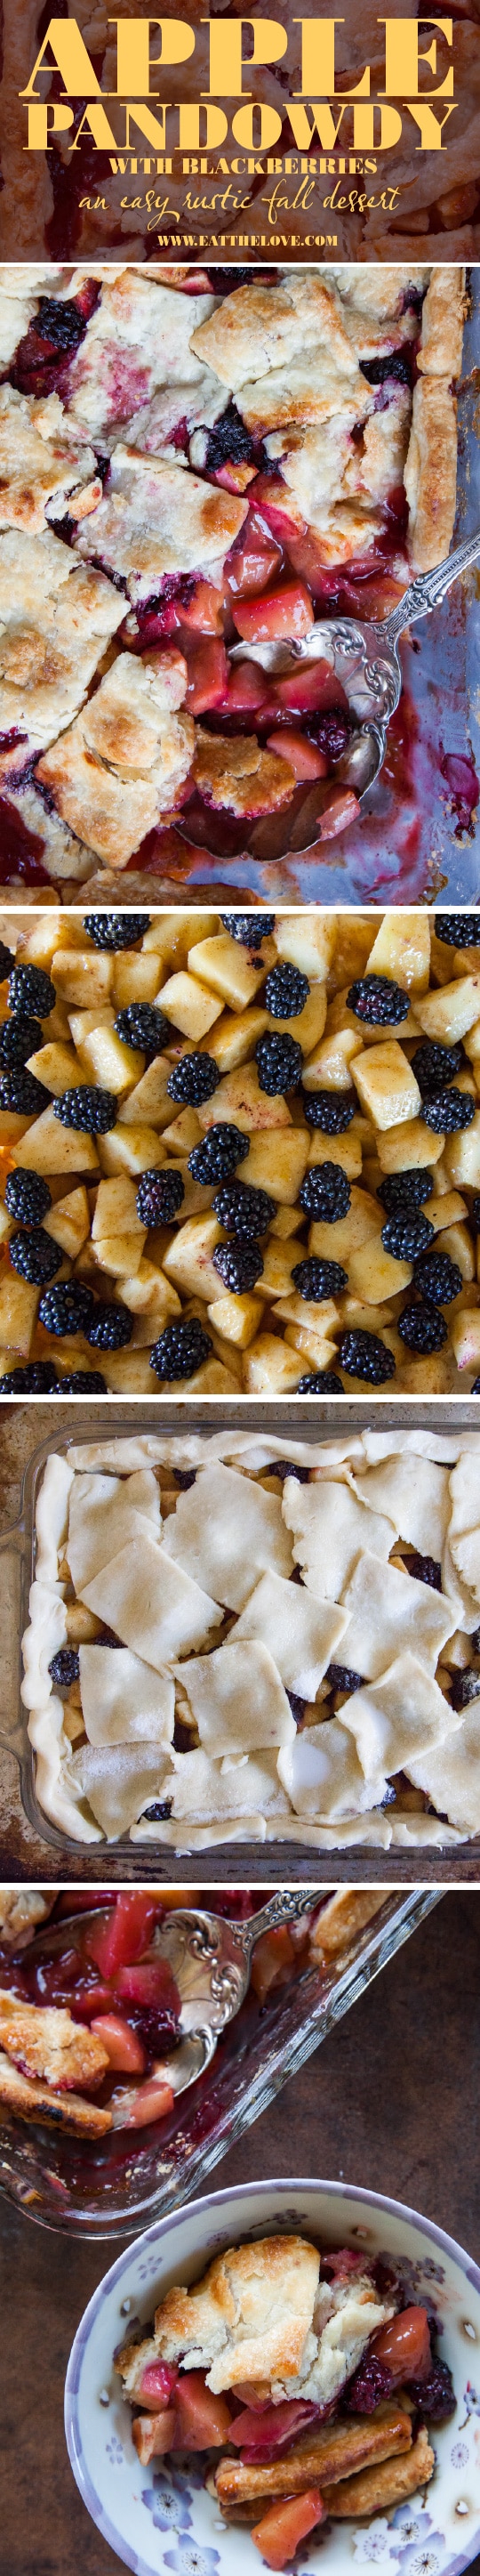 Apple Blackberry Pandowdy, an easy rustic Fall dessert. Recipe and photos by Irvin Lin of Eat the Love.